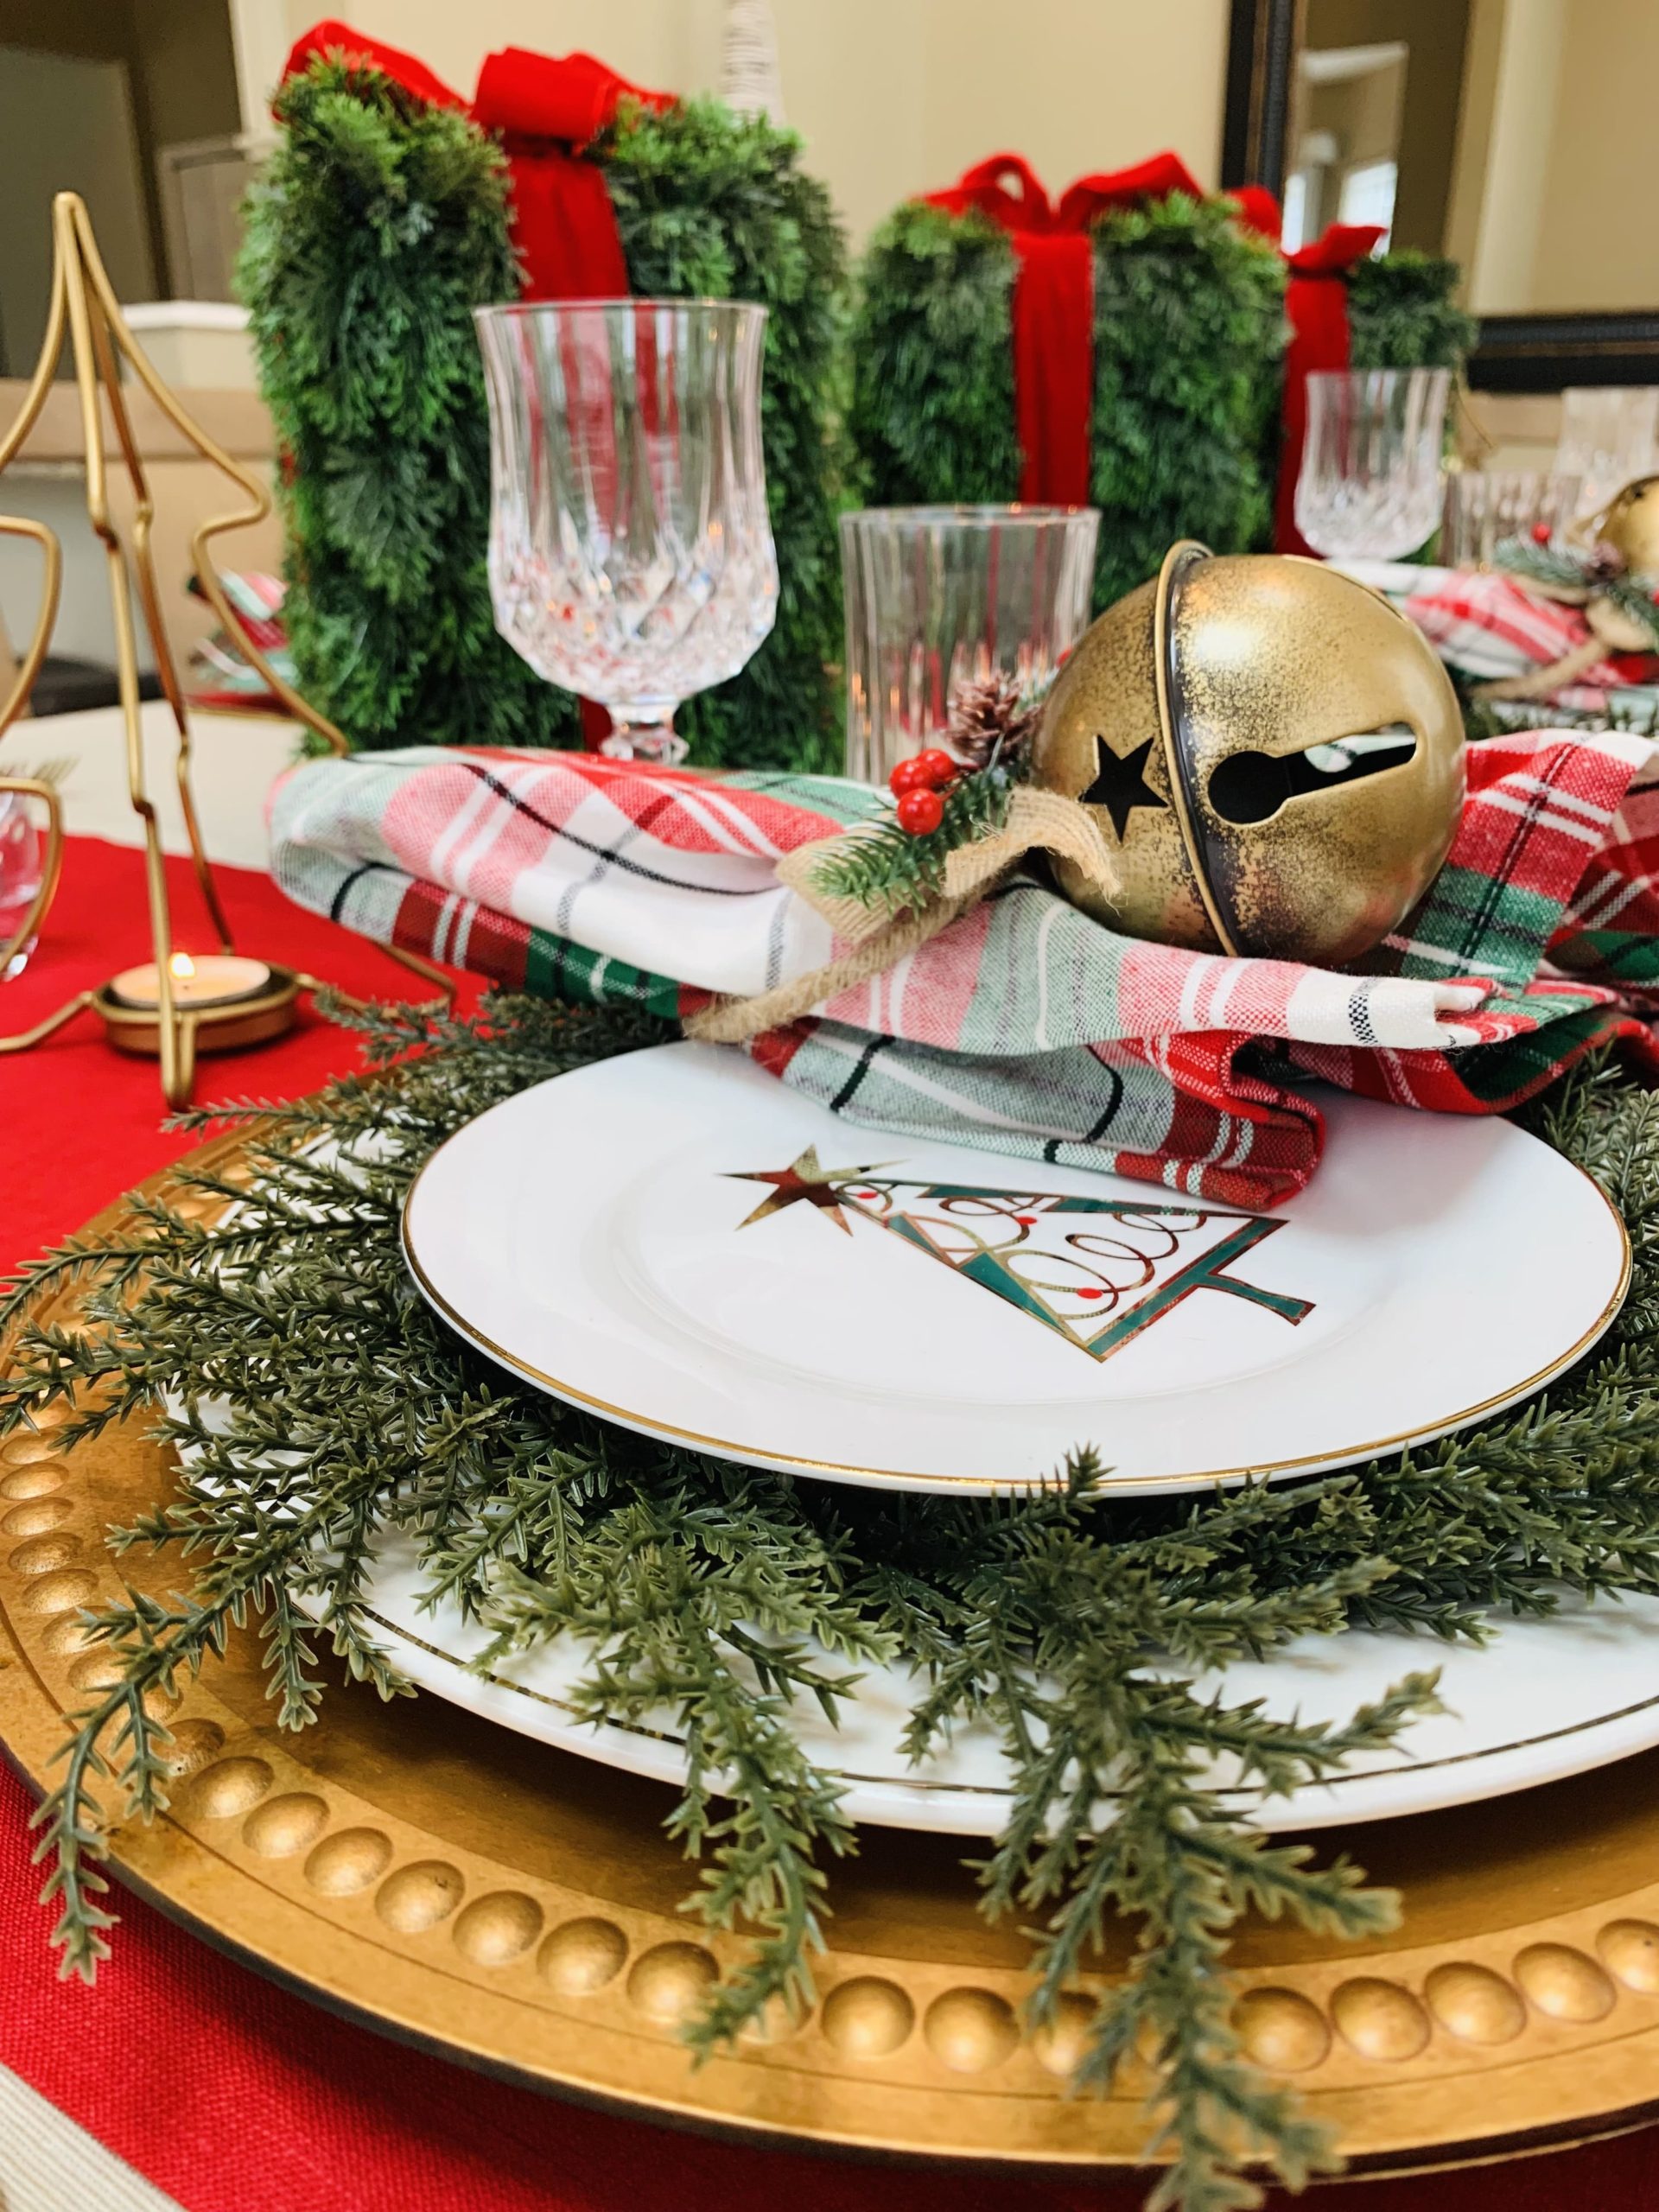 5 Simple Tips for Your Christmas Dinner Tablescape